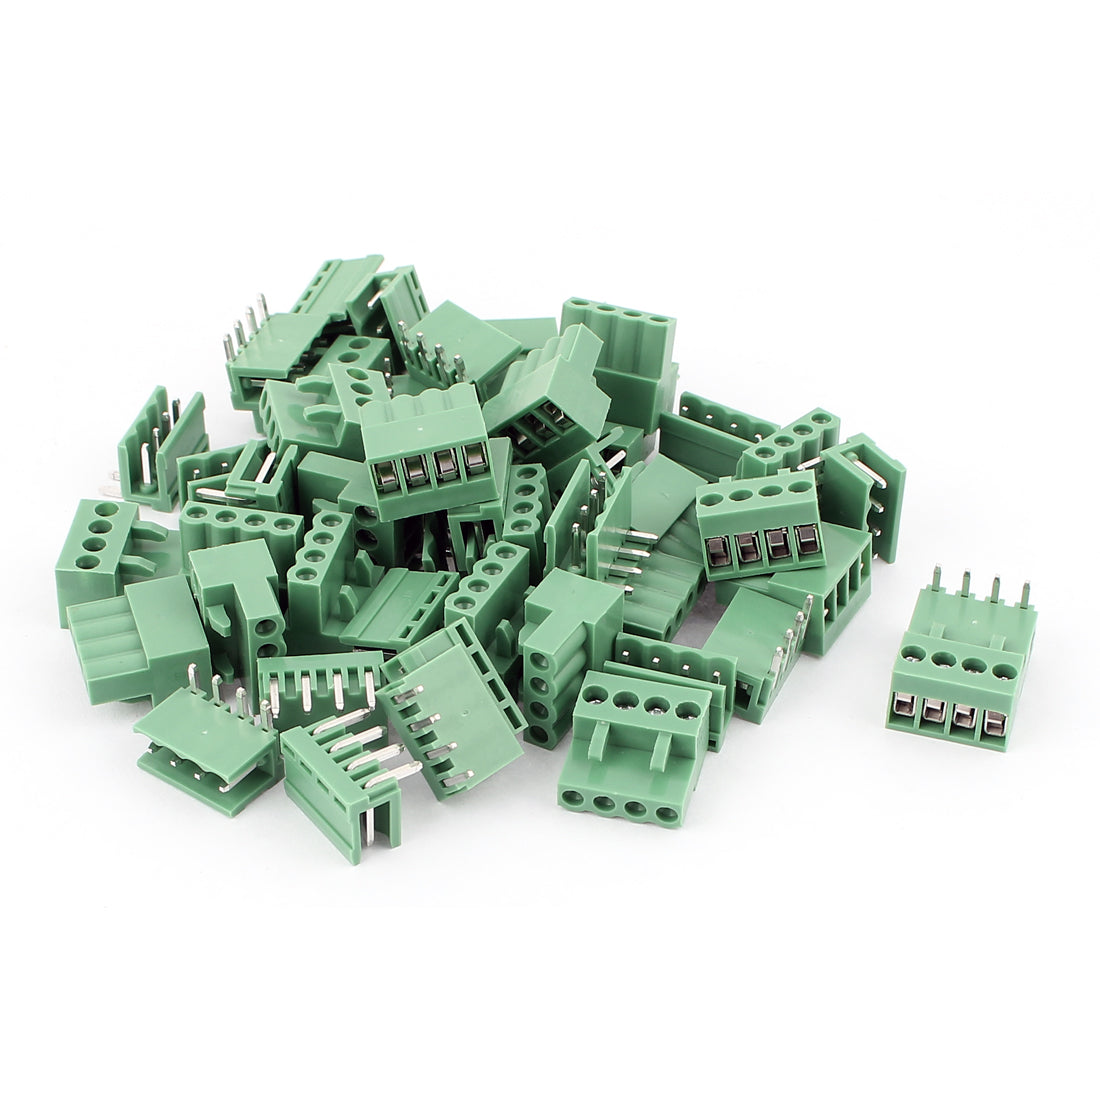 uxcell Uxcell 24 Pair 3.96mm Pitch 4way/pin Screw PCB Pluggable Terminal Block Connector